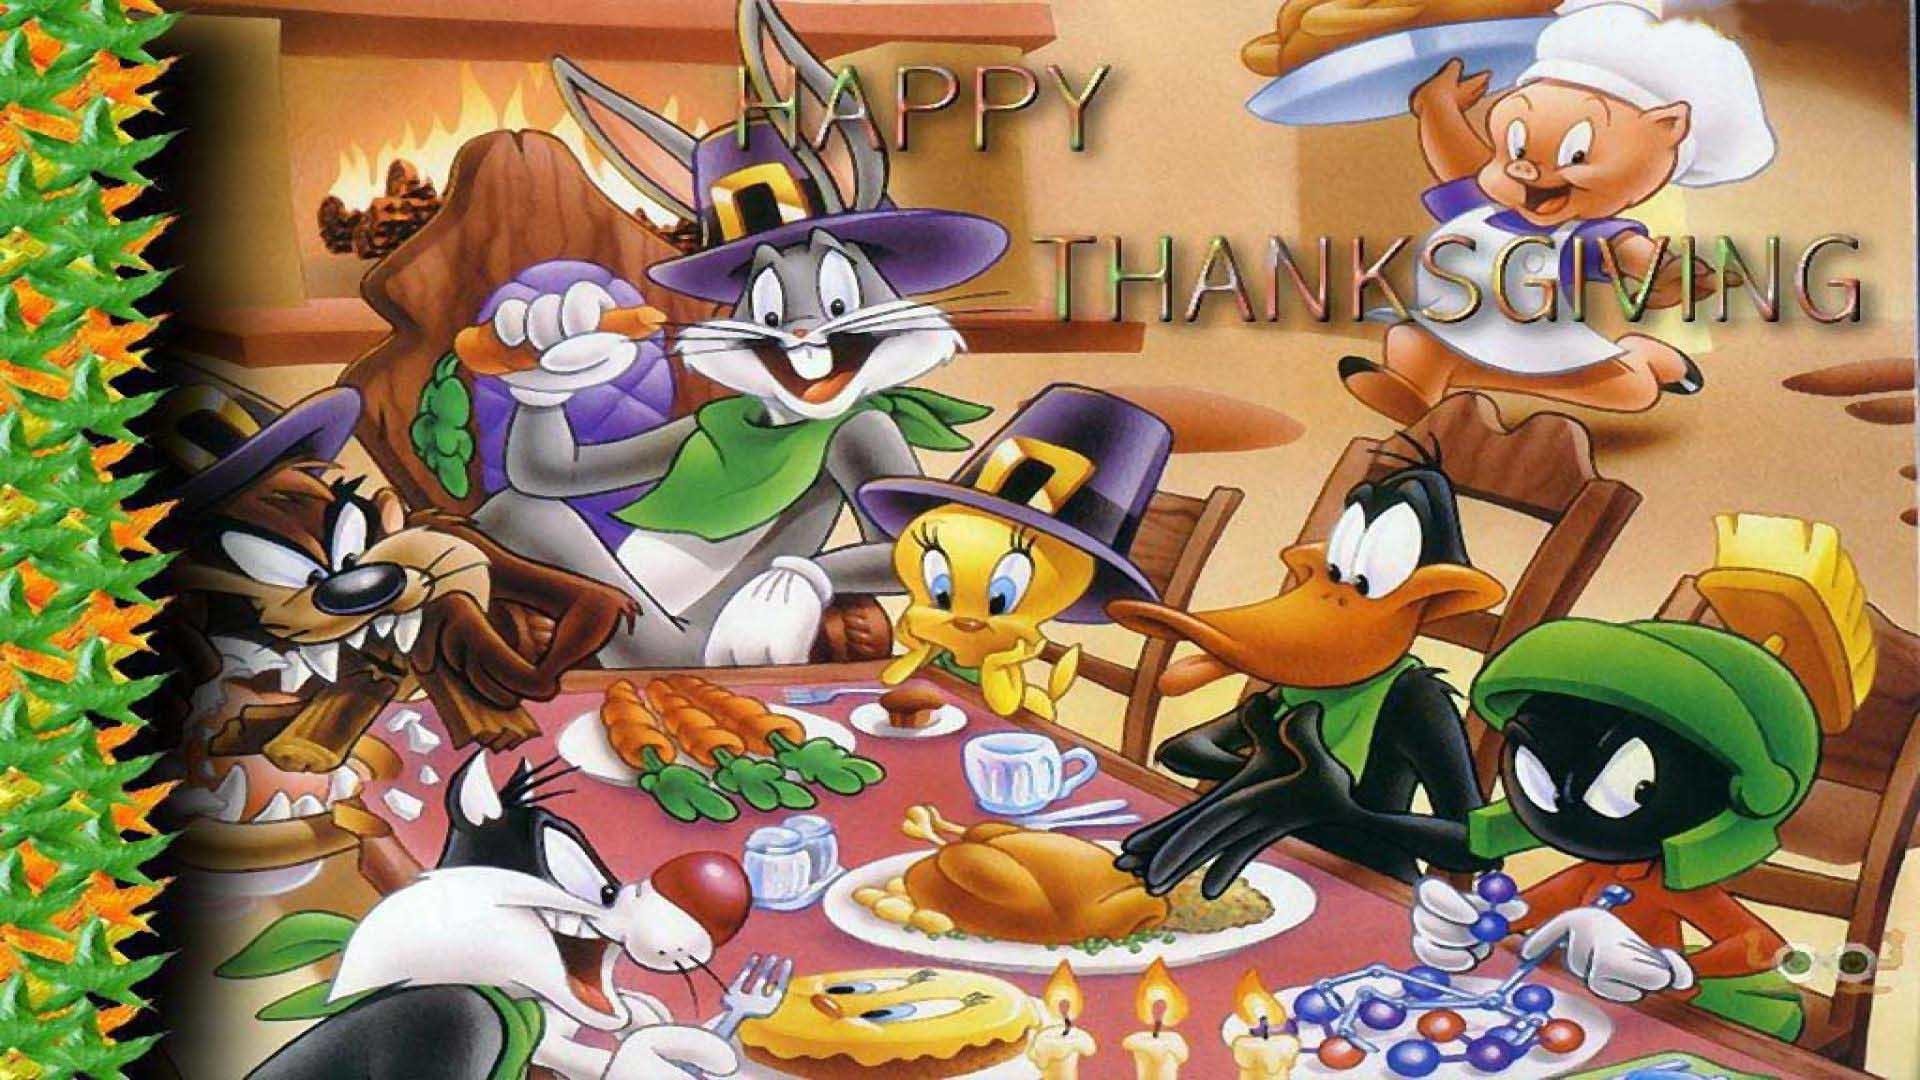 1920x1080  funny thanksgiving pictures and quotes | Funny Thanksgiving  Wallpaper | The Now Forgotten Holiday....Thanksgiving | Pinterest |  Thanksgiving ...